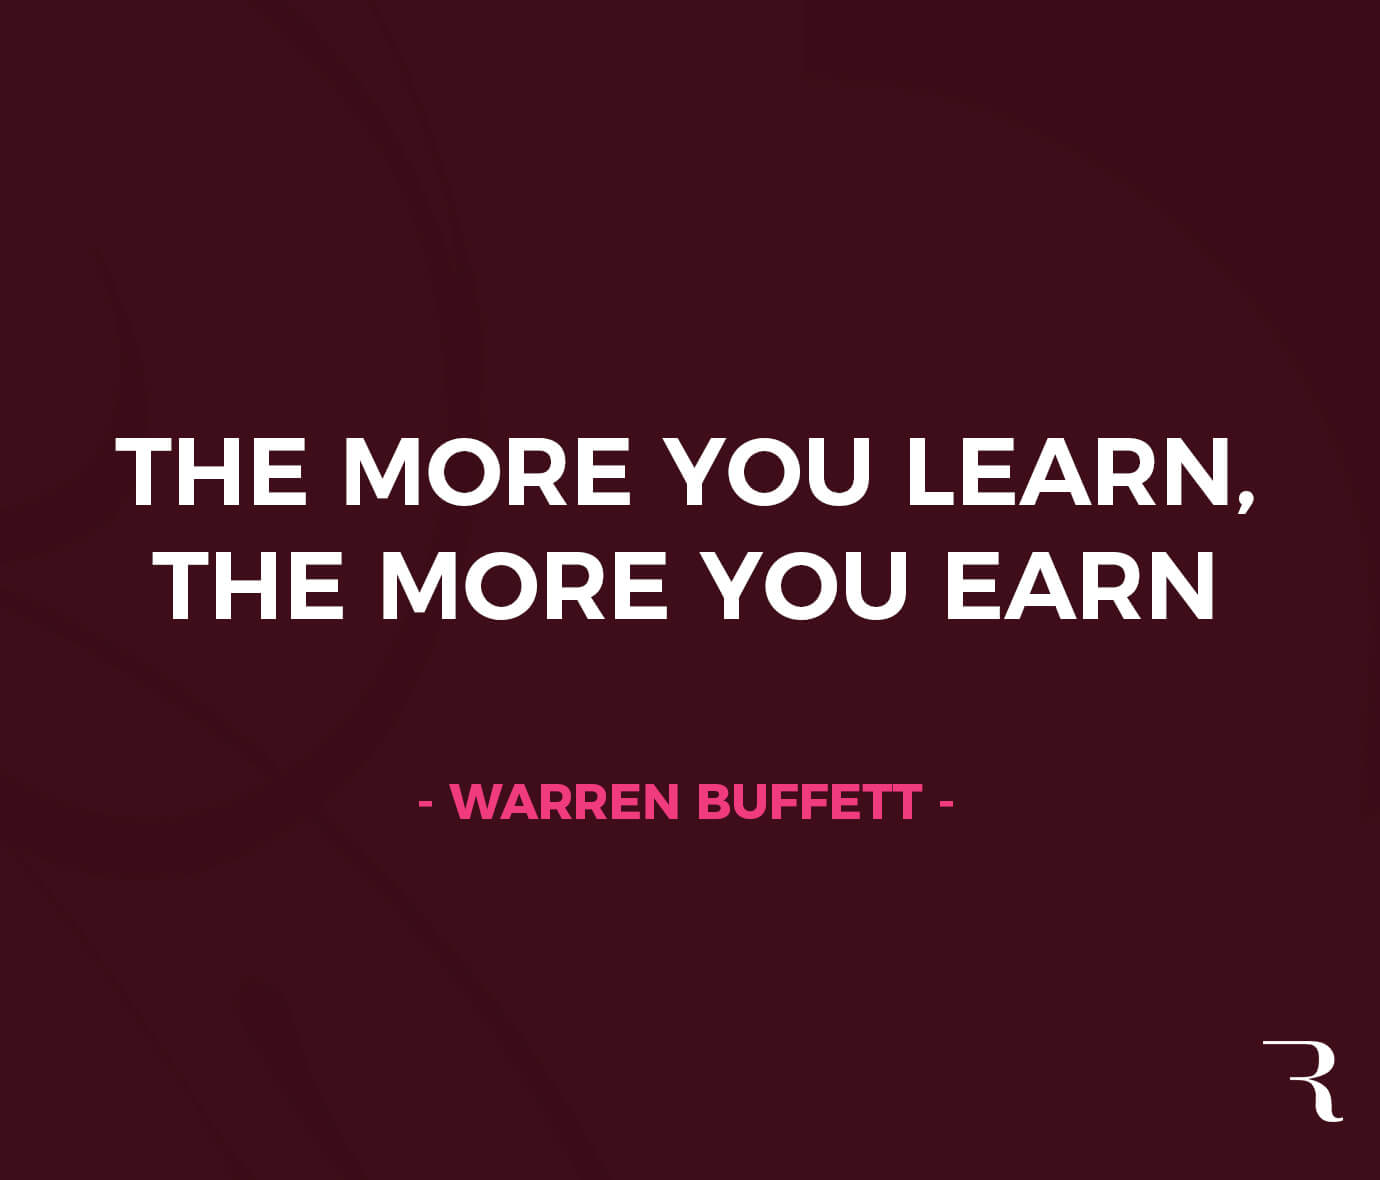 Motivational Quotes: “The more you learn, the more you earn.” 112 Motivational Quotes to Be a Better Entrepreneur